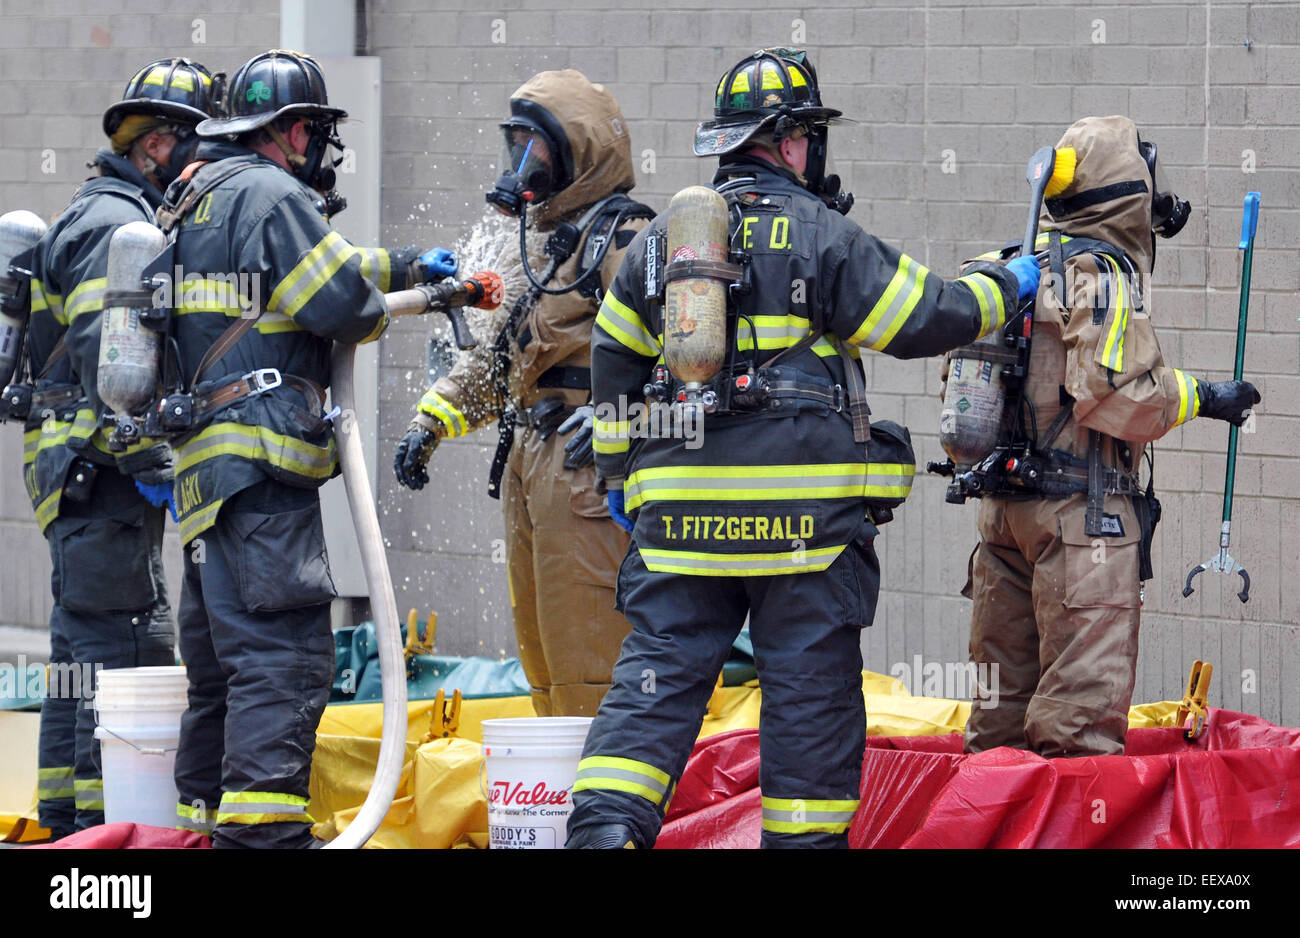 New Haven Firefighters in hazmat suits clean off after a spill at the New Haven Walgreens (York Street) that sent 4-people to the hospital . July 9, 2014. CT USA Stock Photo